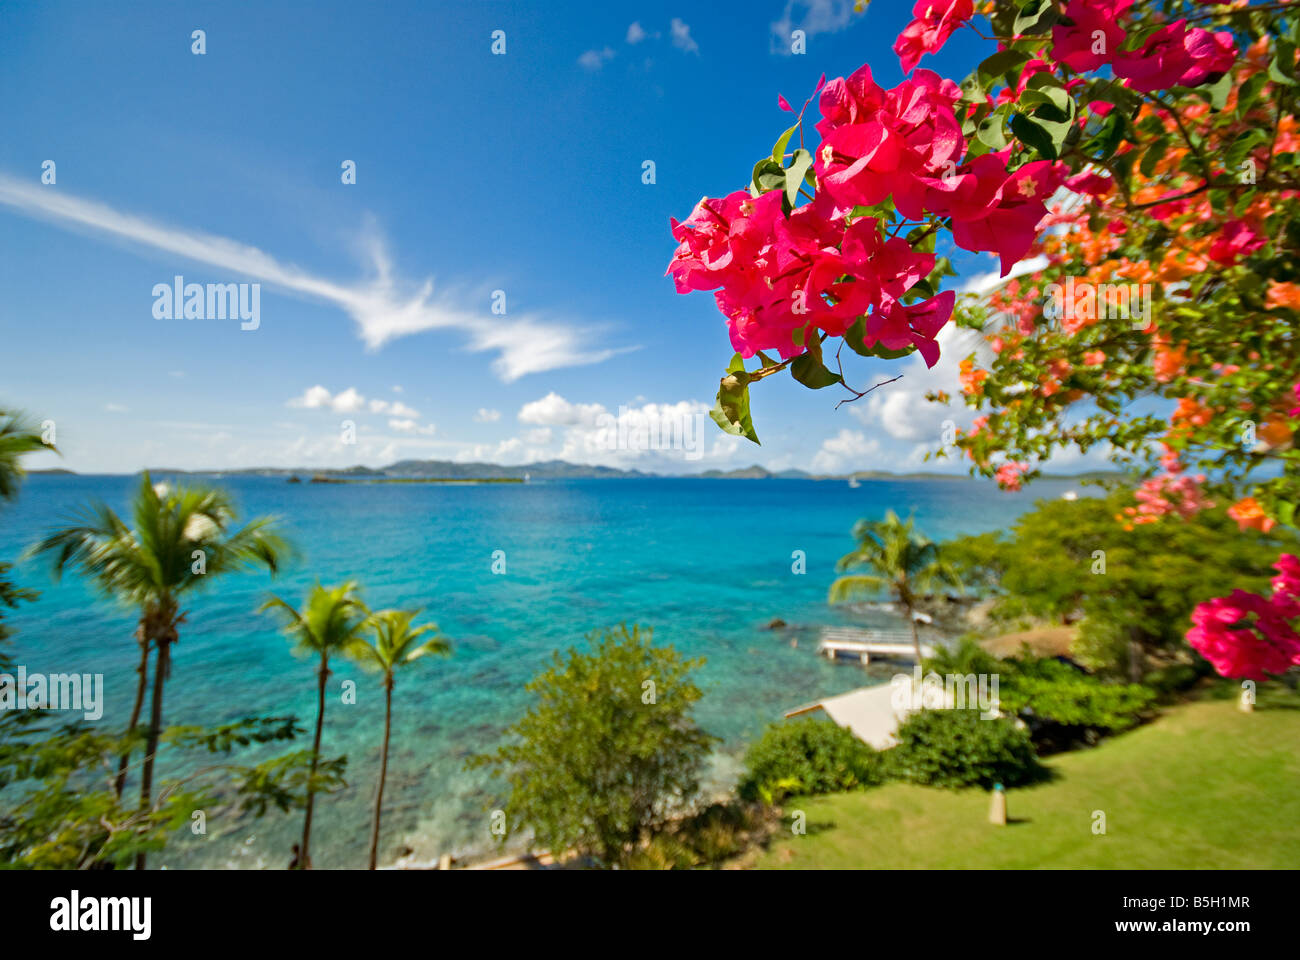 ST JOHN, US Virgin Islands - A view out over the clear Caribbean waters off Cruz Bay in St John in the US Virgin Islands, with pink flowers at right (focus is on the flowers). Stock Photo